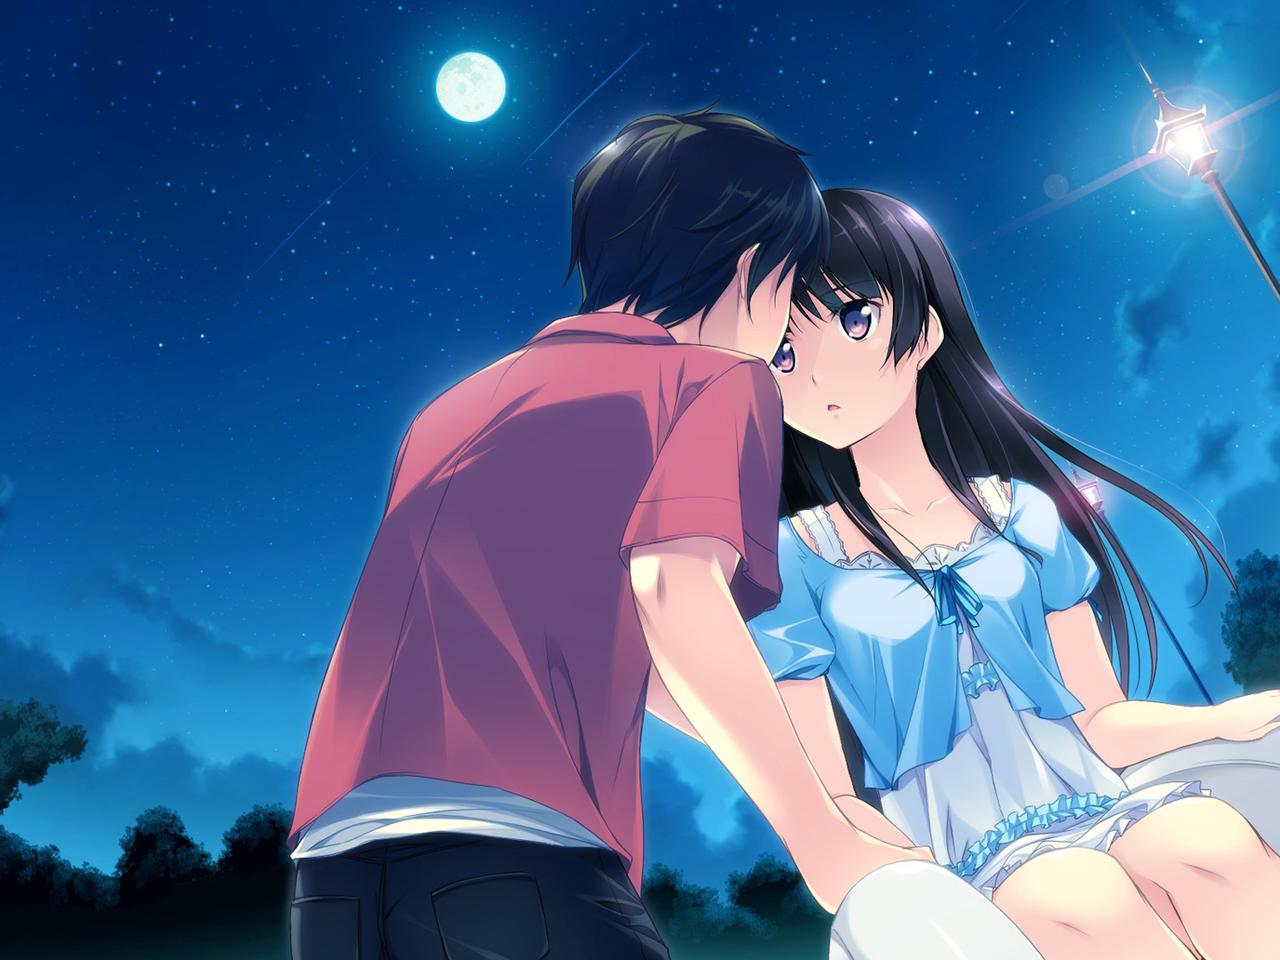 Anime couple during the night under the moonlight